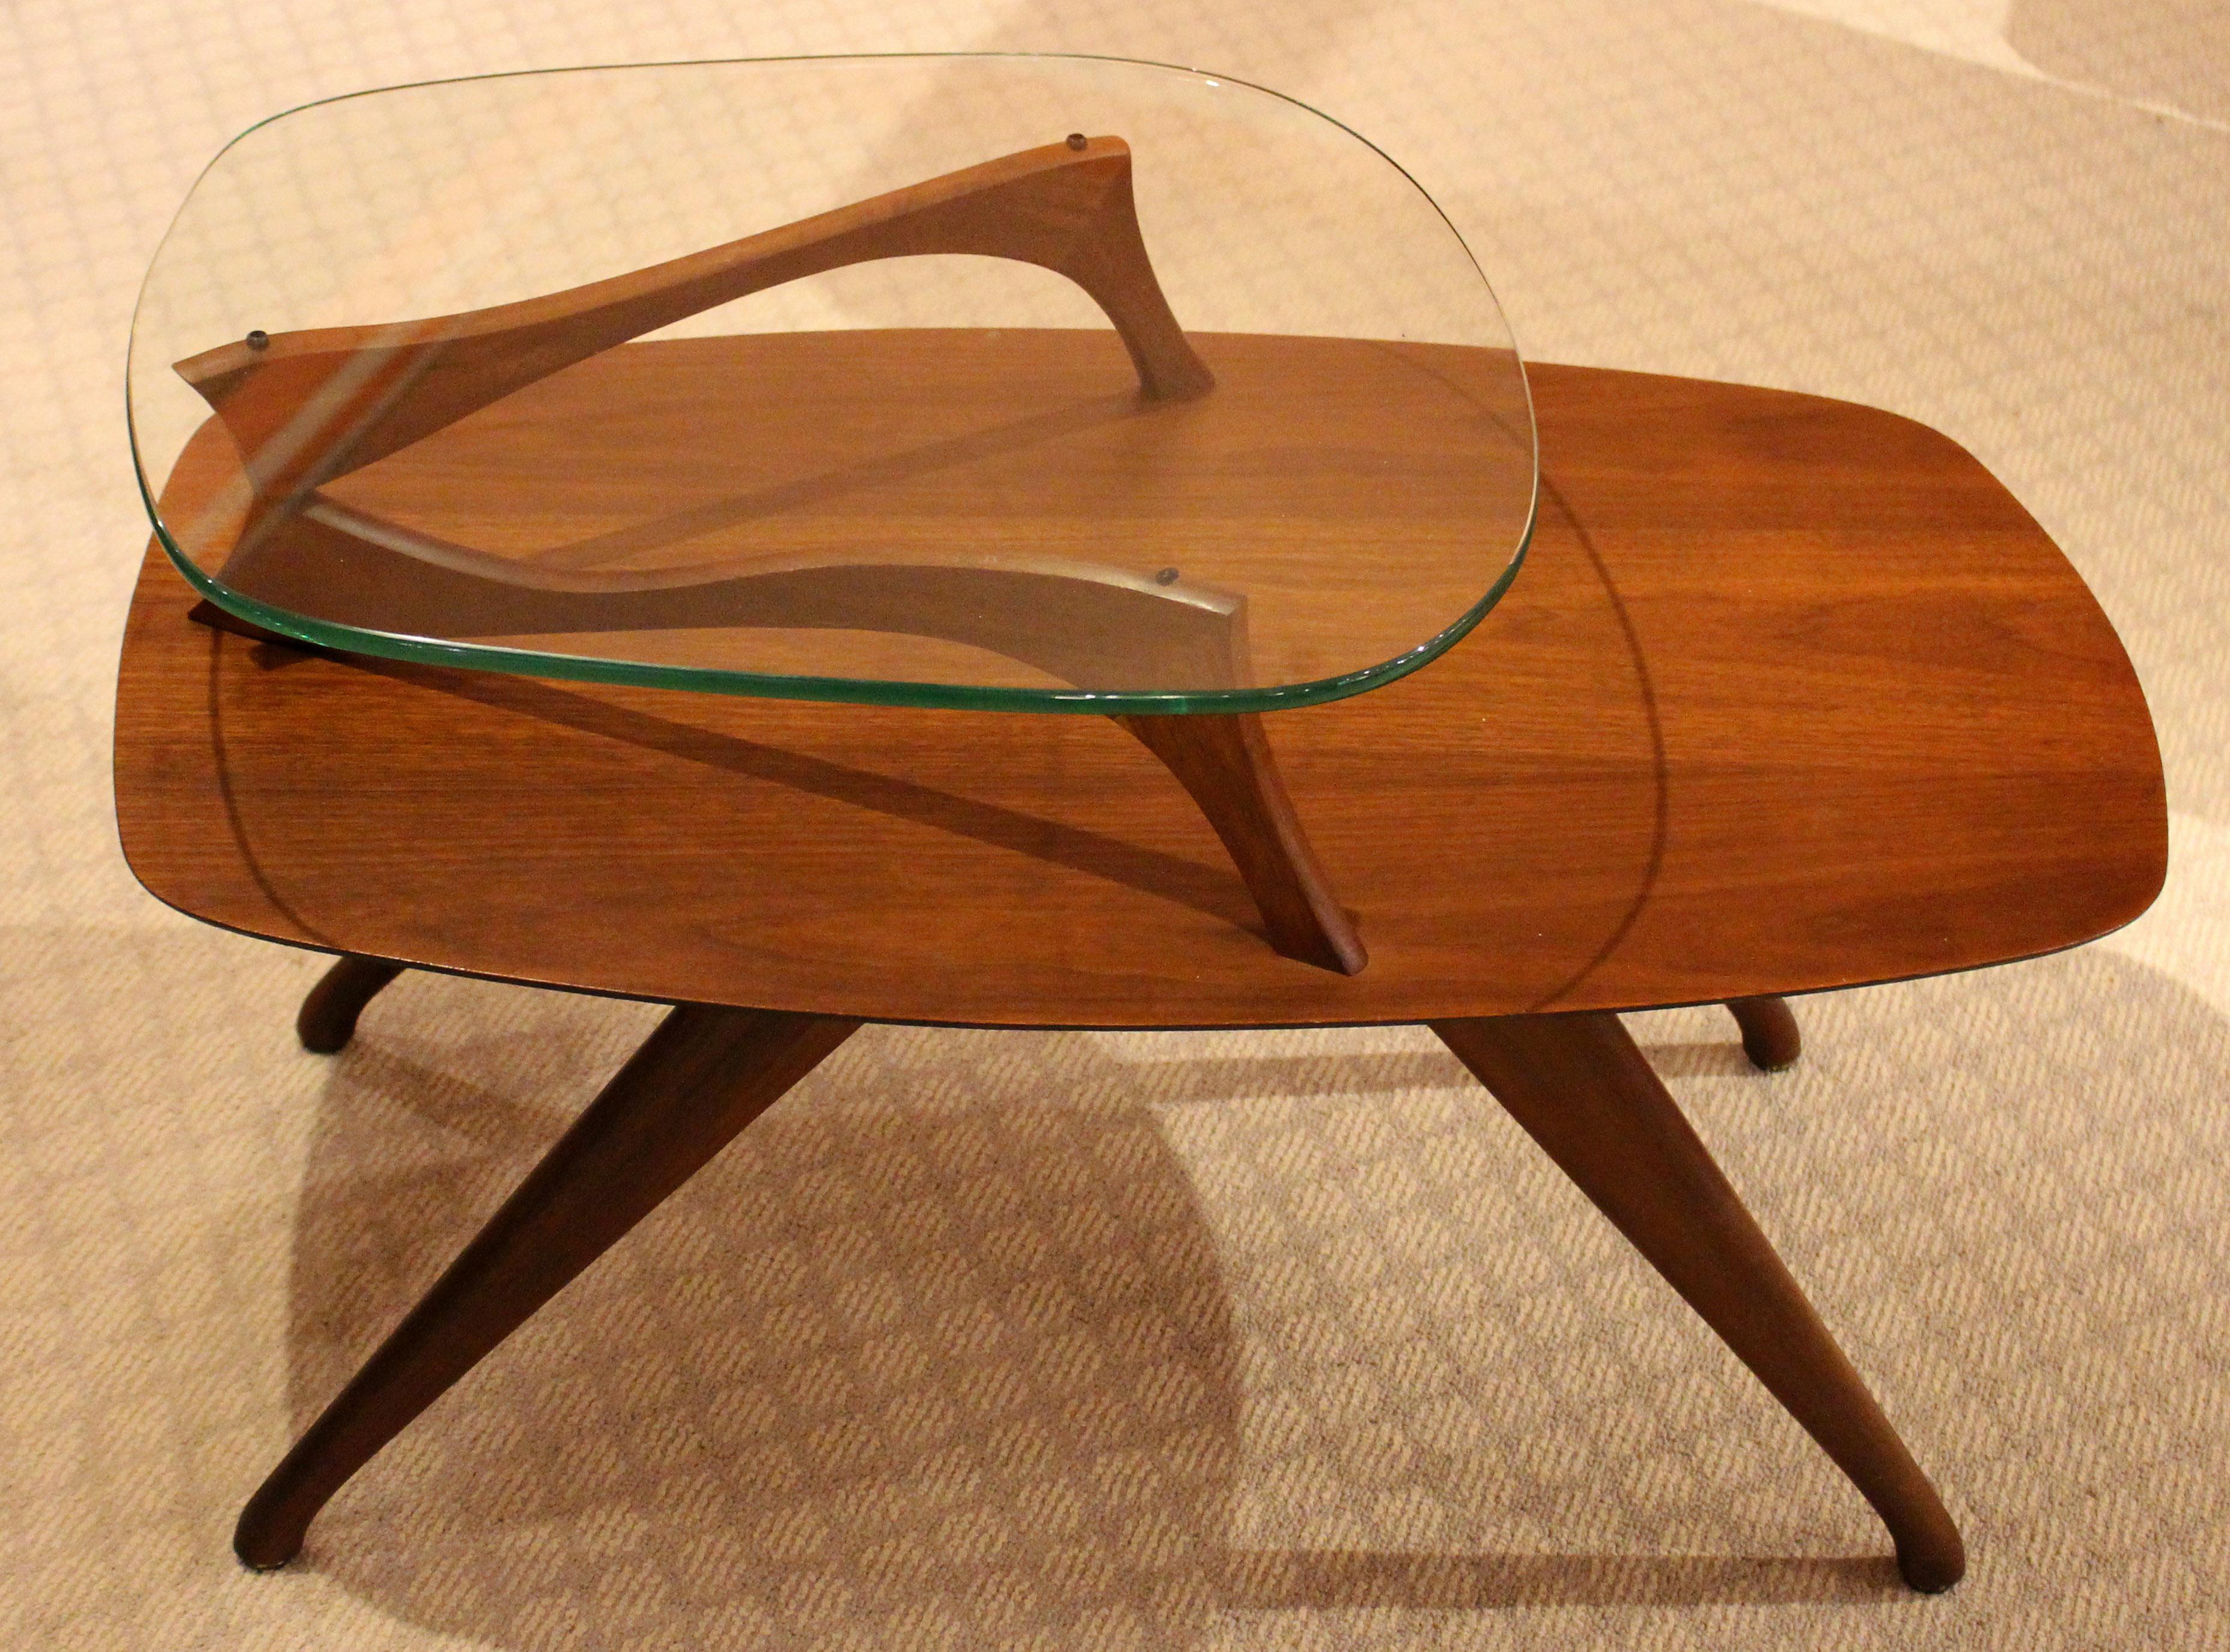 Mid-Century Modern side table or end table, walnut and glass, c.1950-60s. One of the great designs of the mid century modern era. Attributed to Vladimir Kagan. This table came out of a NJ home where it was with a Kagan guitar pick table. Possibly